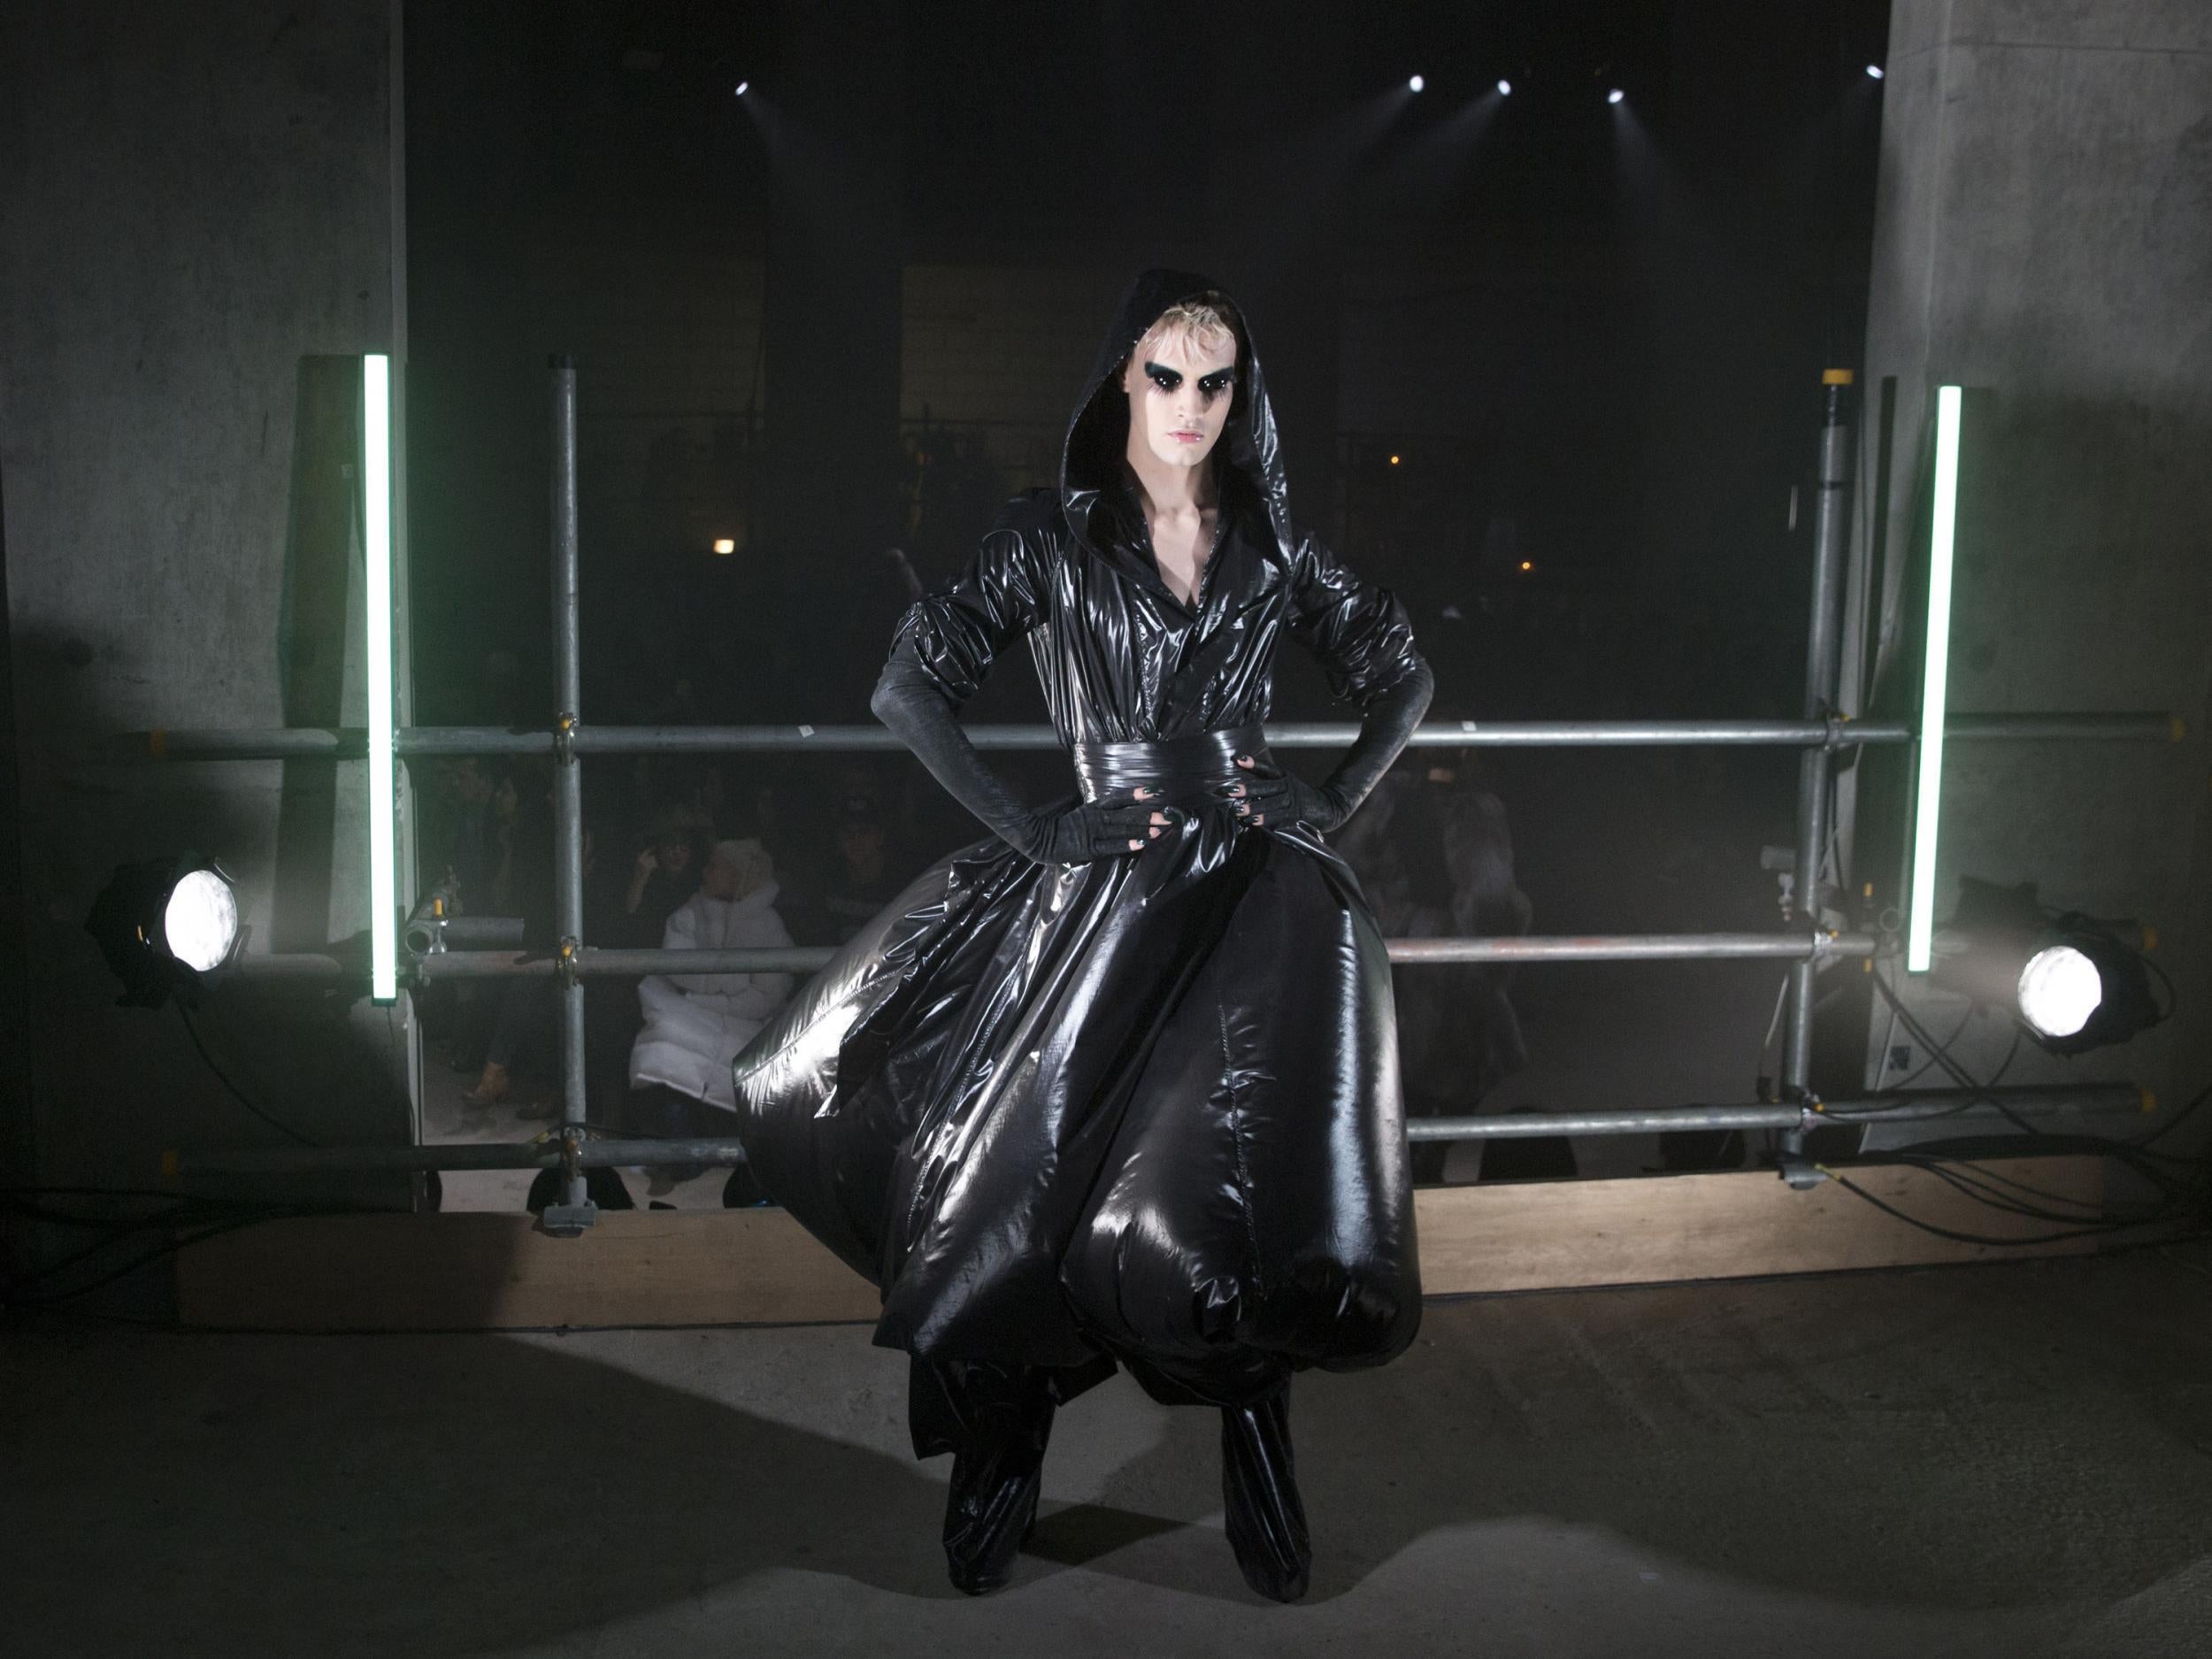 Gareth Pugh’s collection was riffed with anarchy and extremism